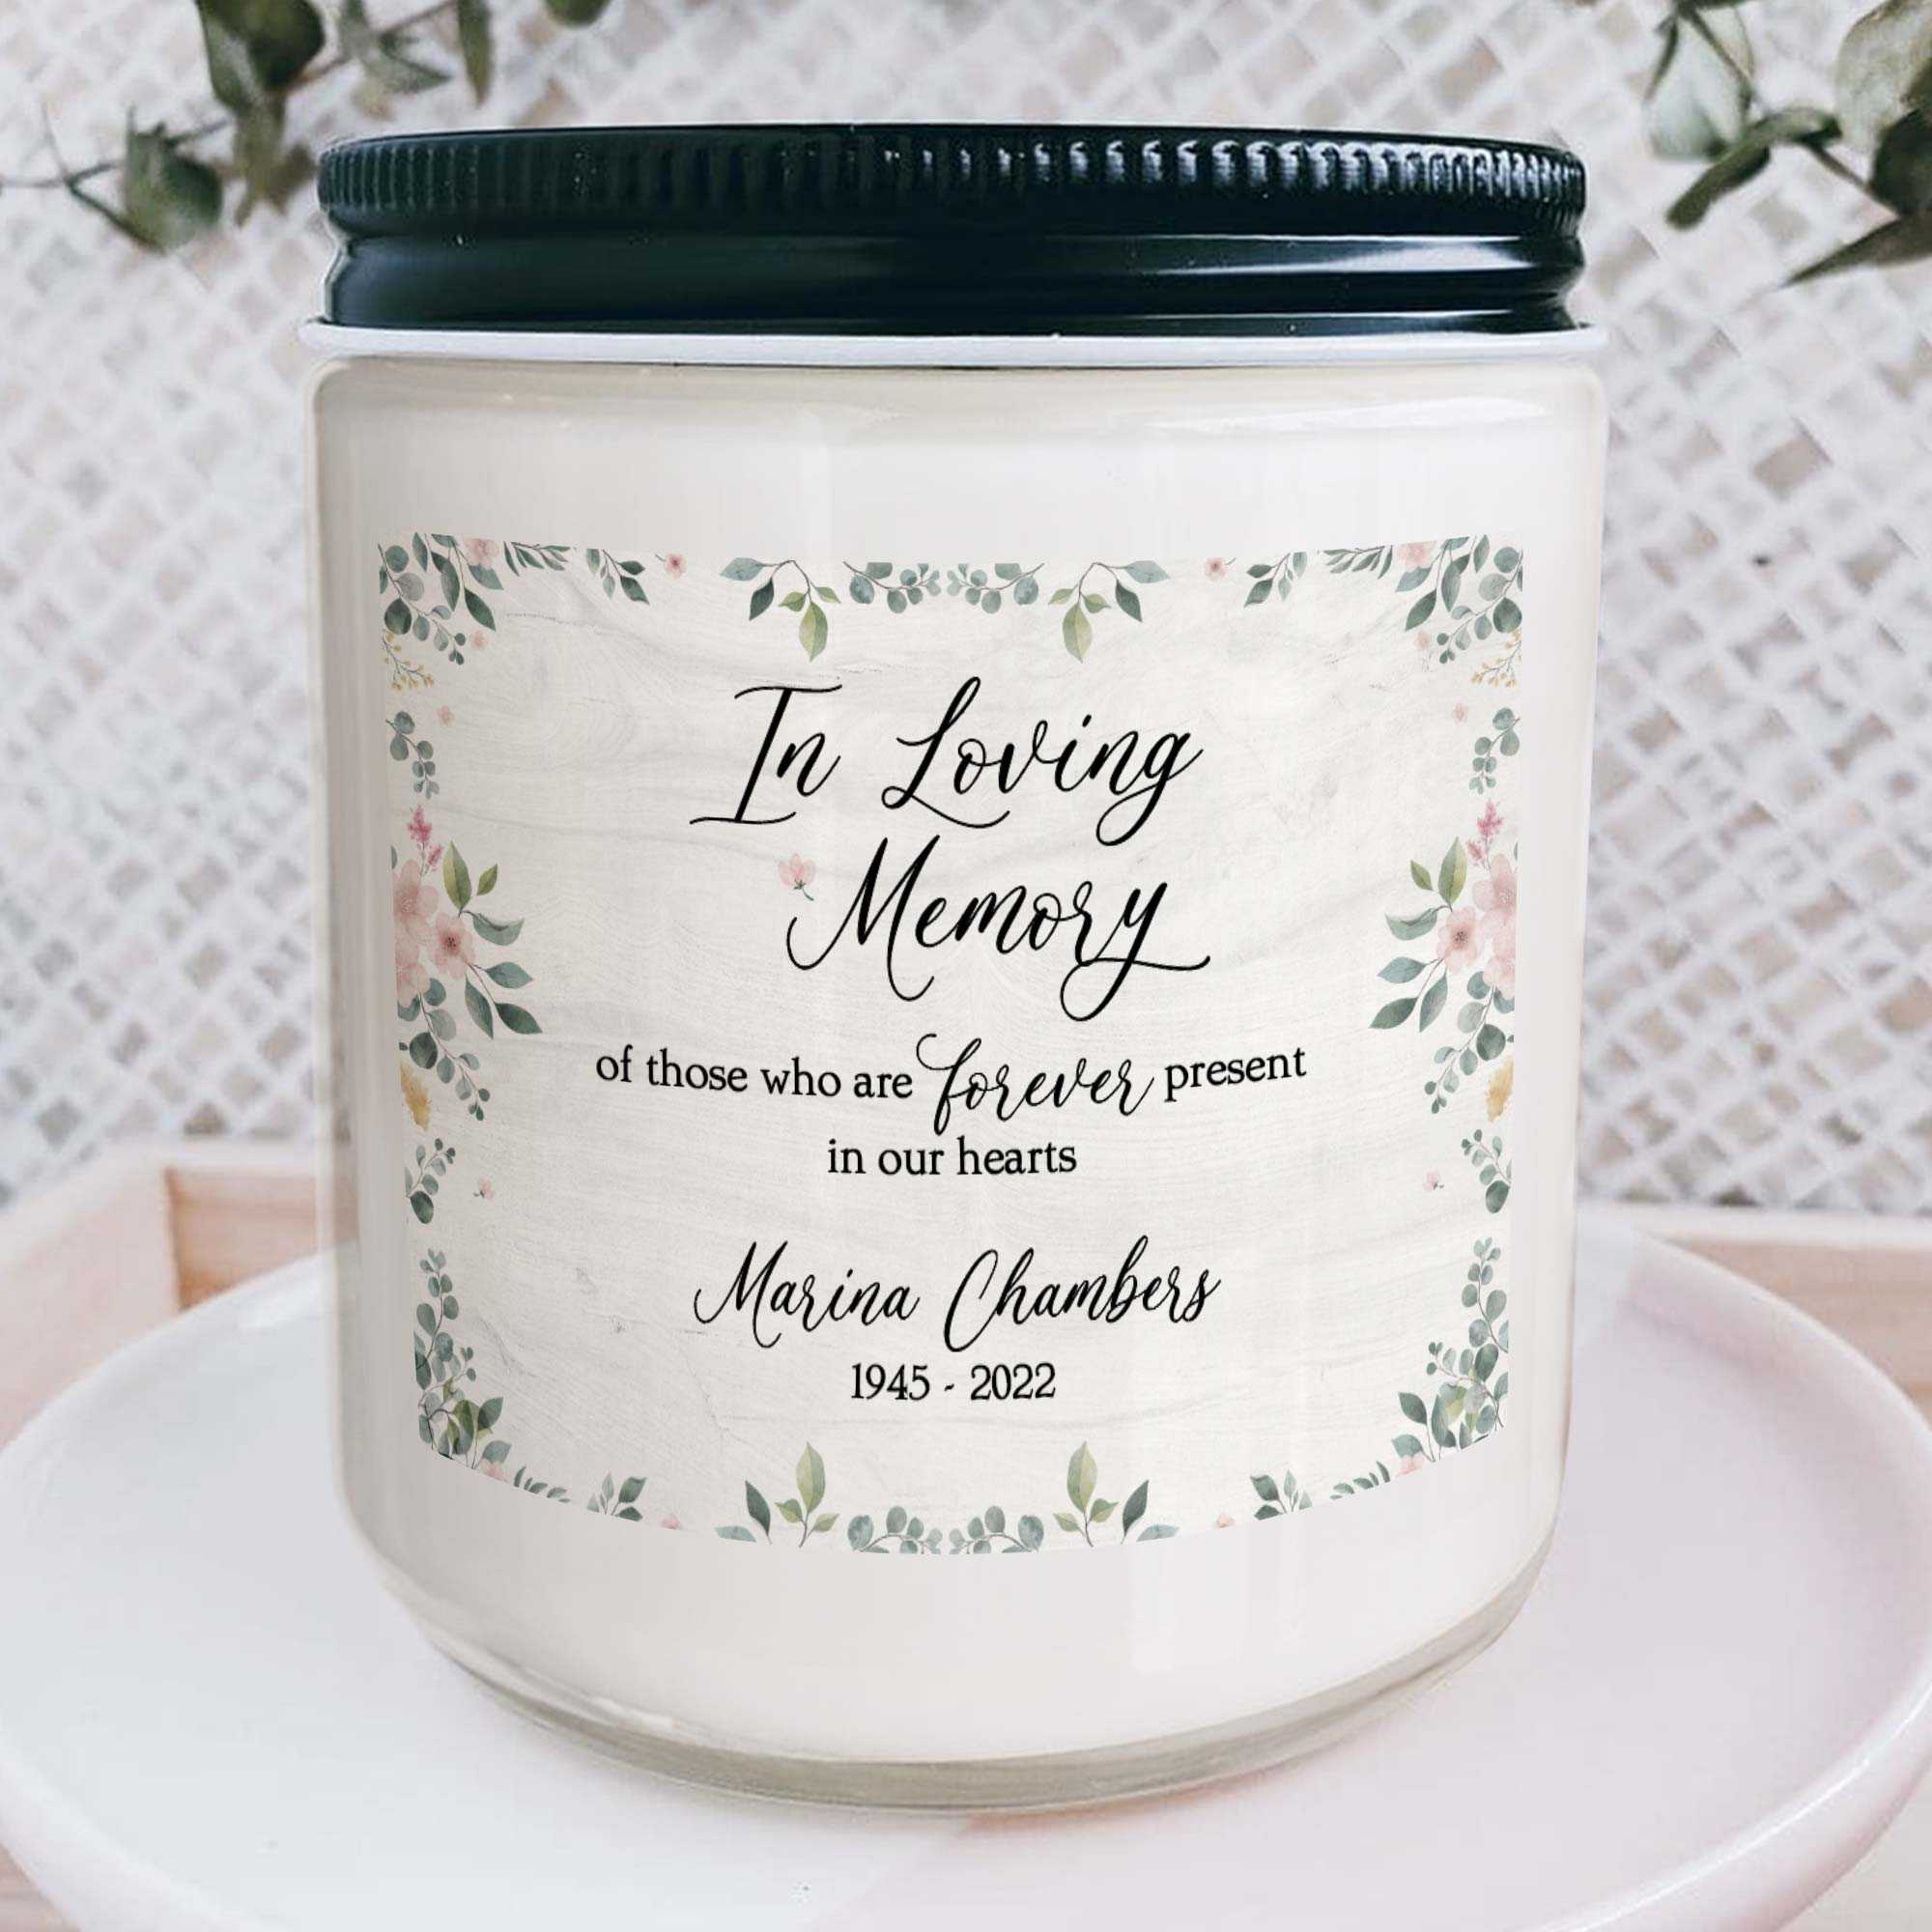 Personalized Memorial Candle For Loss Of Mother, Sympathy Candle For Mother's Day, Remembrance Candle